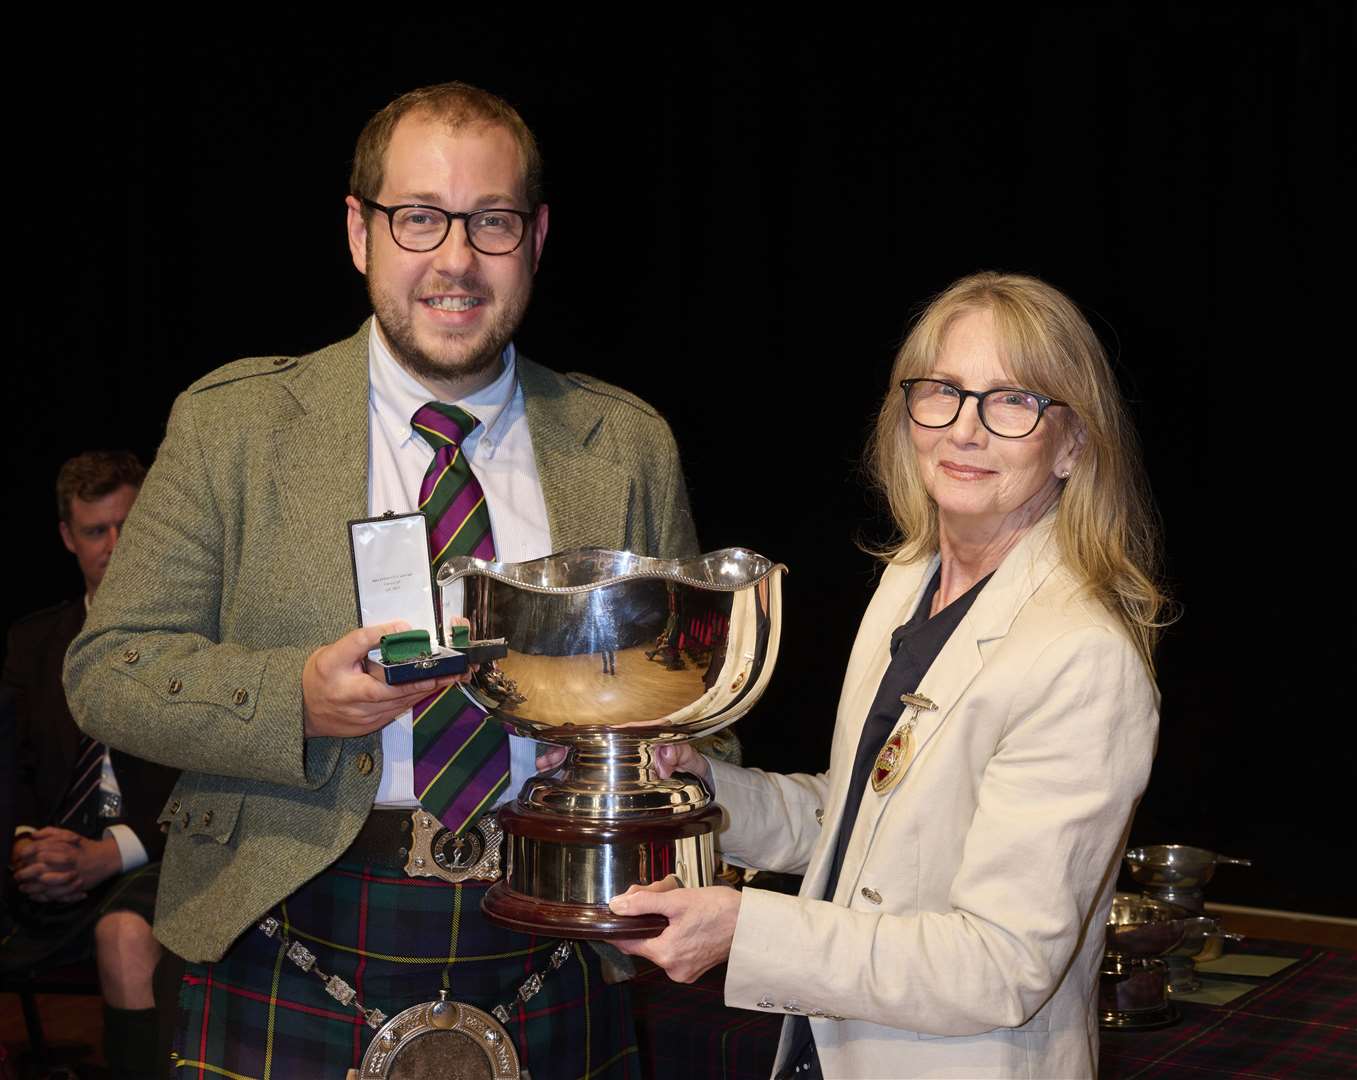 Glynis Campbell-Sinclair (the Provost of Inverness) with Aladair Henderson who won the 1st A MSR at the Northern Meeting 2022 which was held at Eden Court in Inverness.